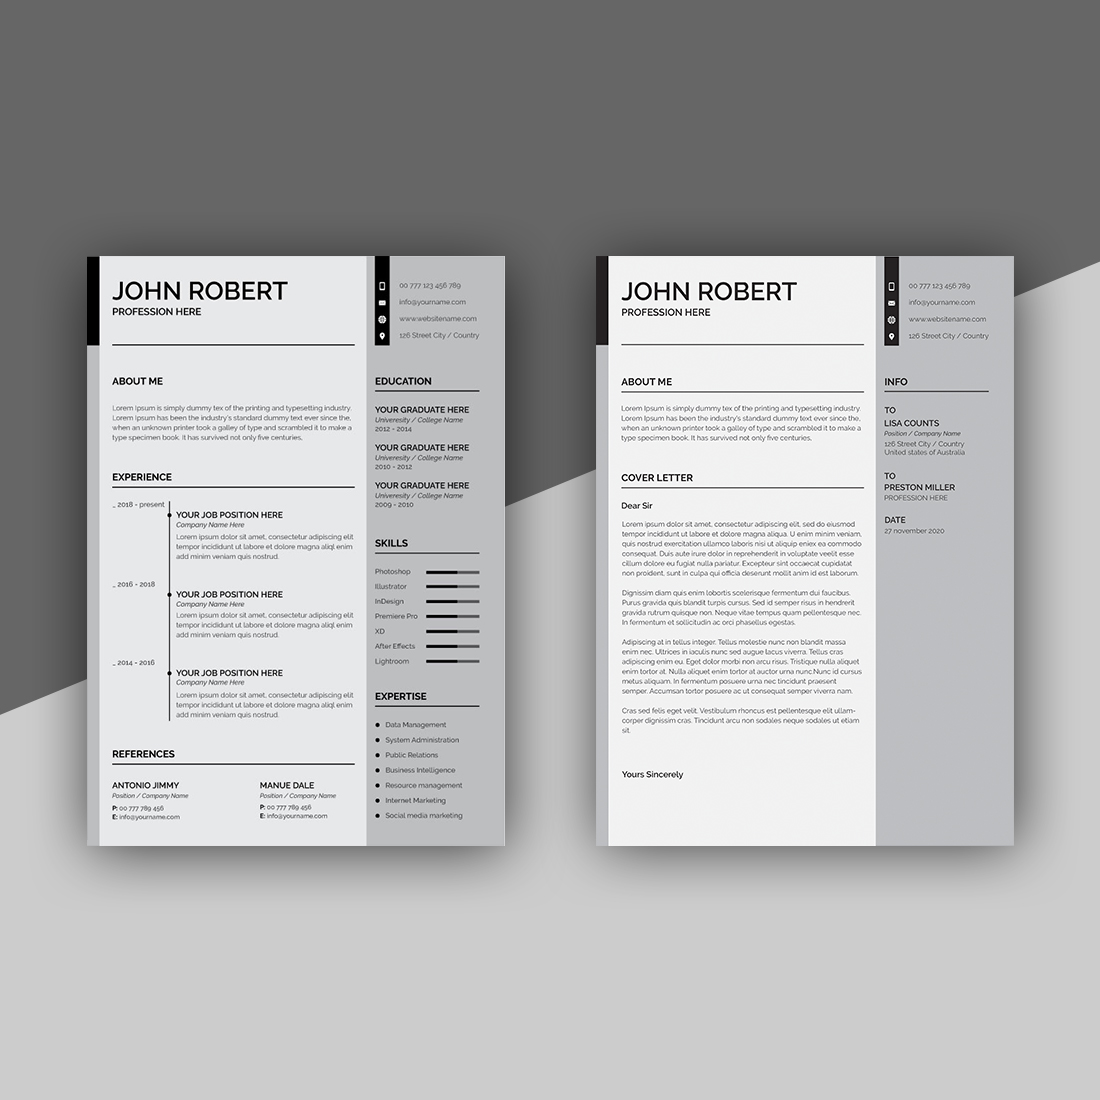 Clean Modern Resume and Cover Letter Layout Vector Template facebook image.